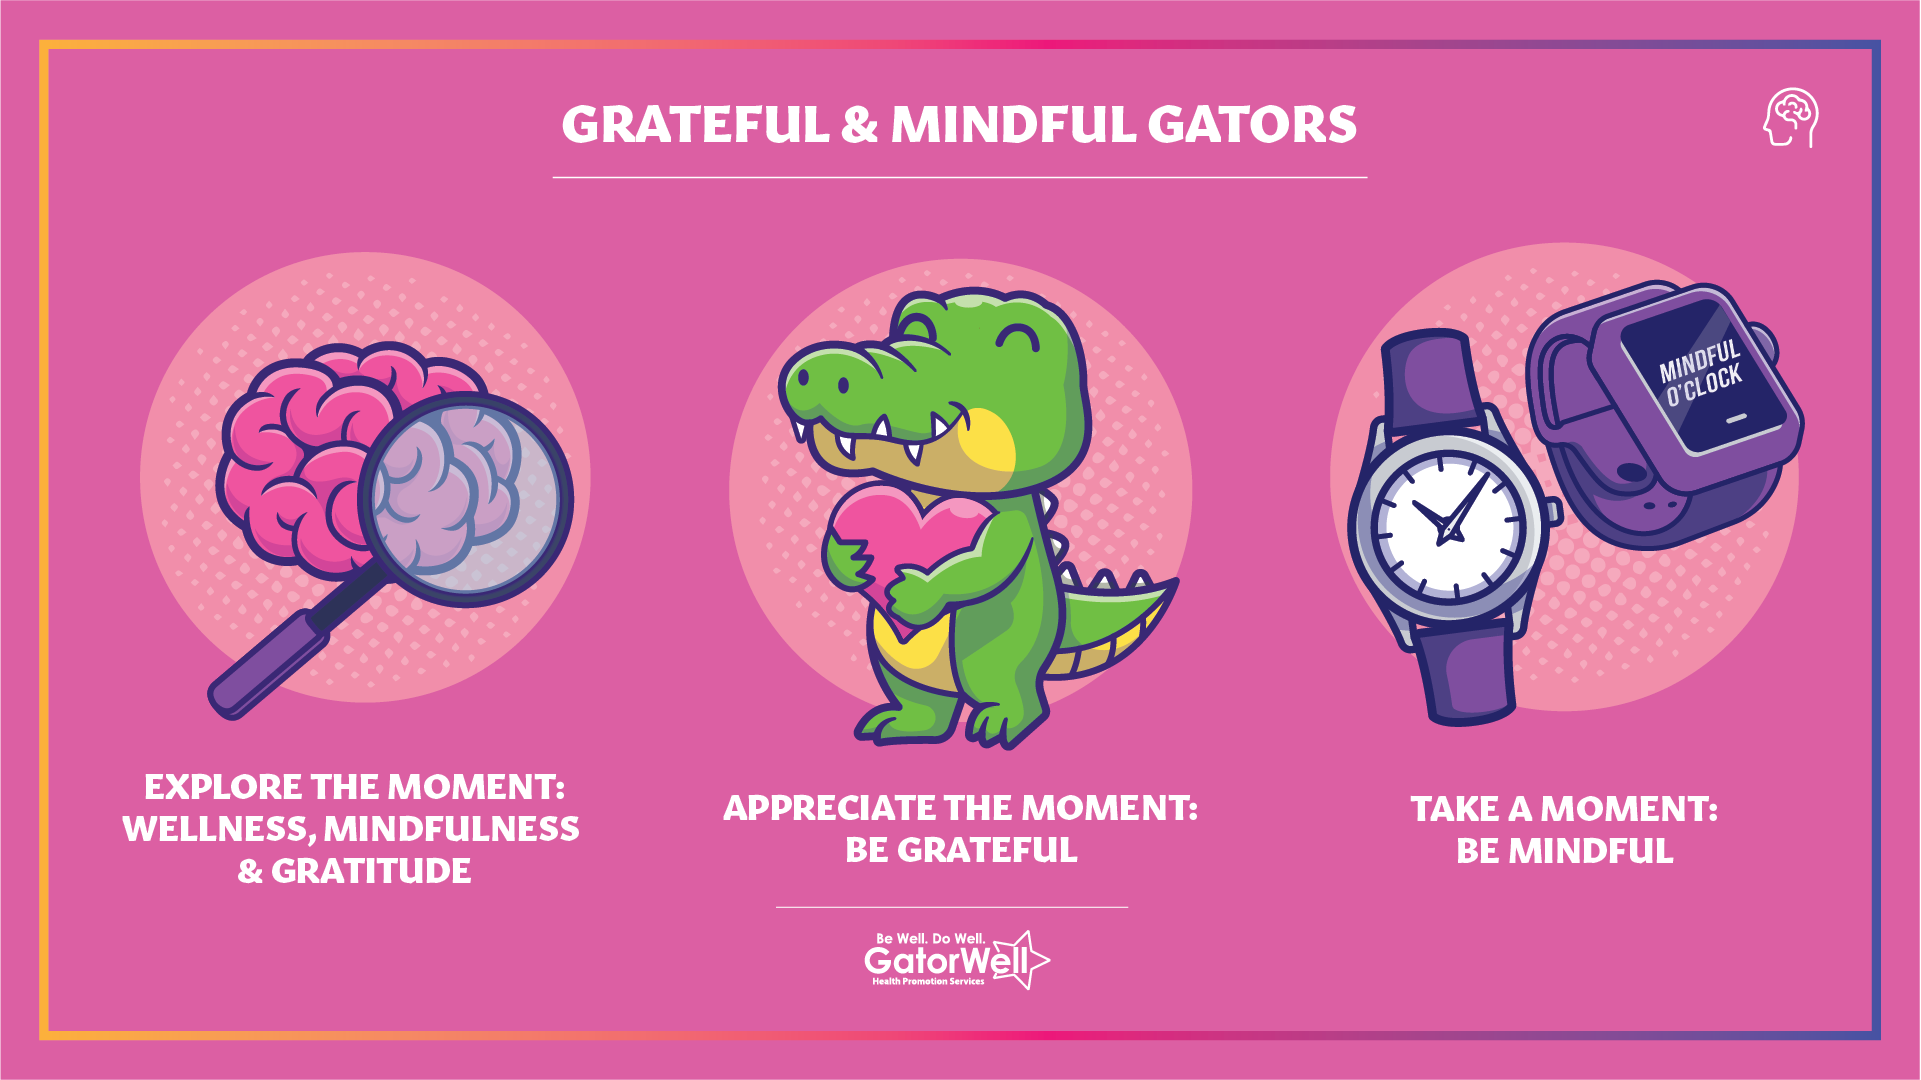 Grate and Mindful Gators